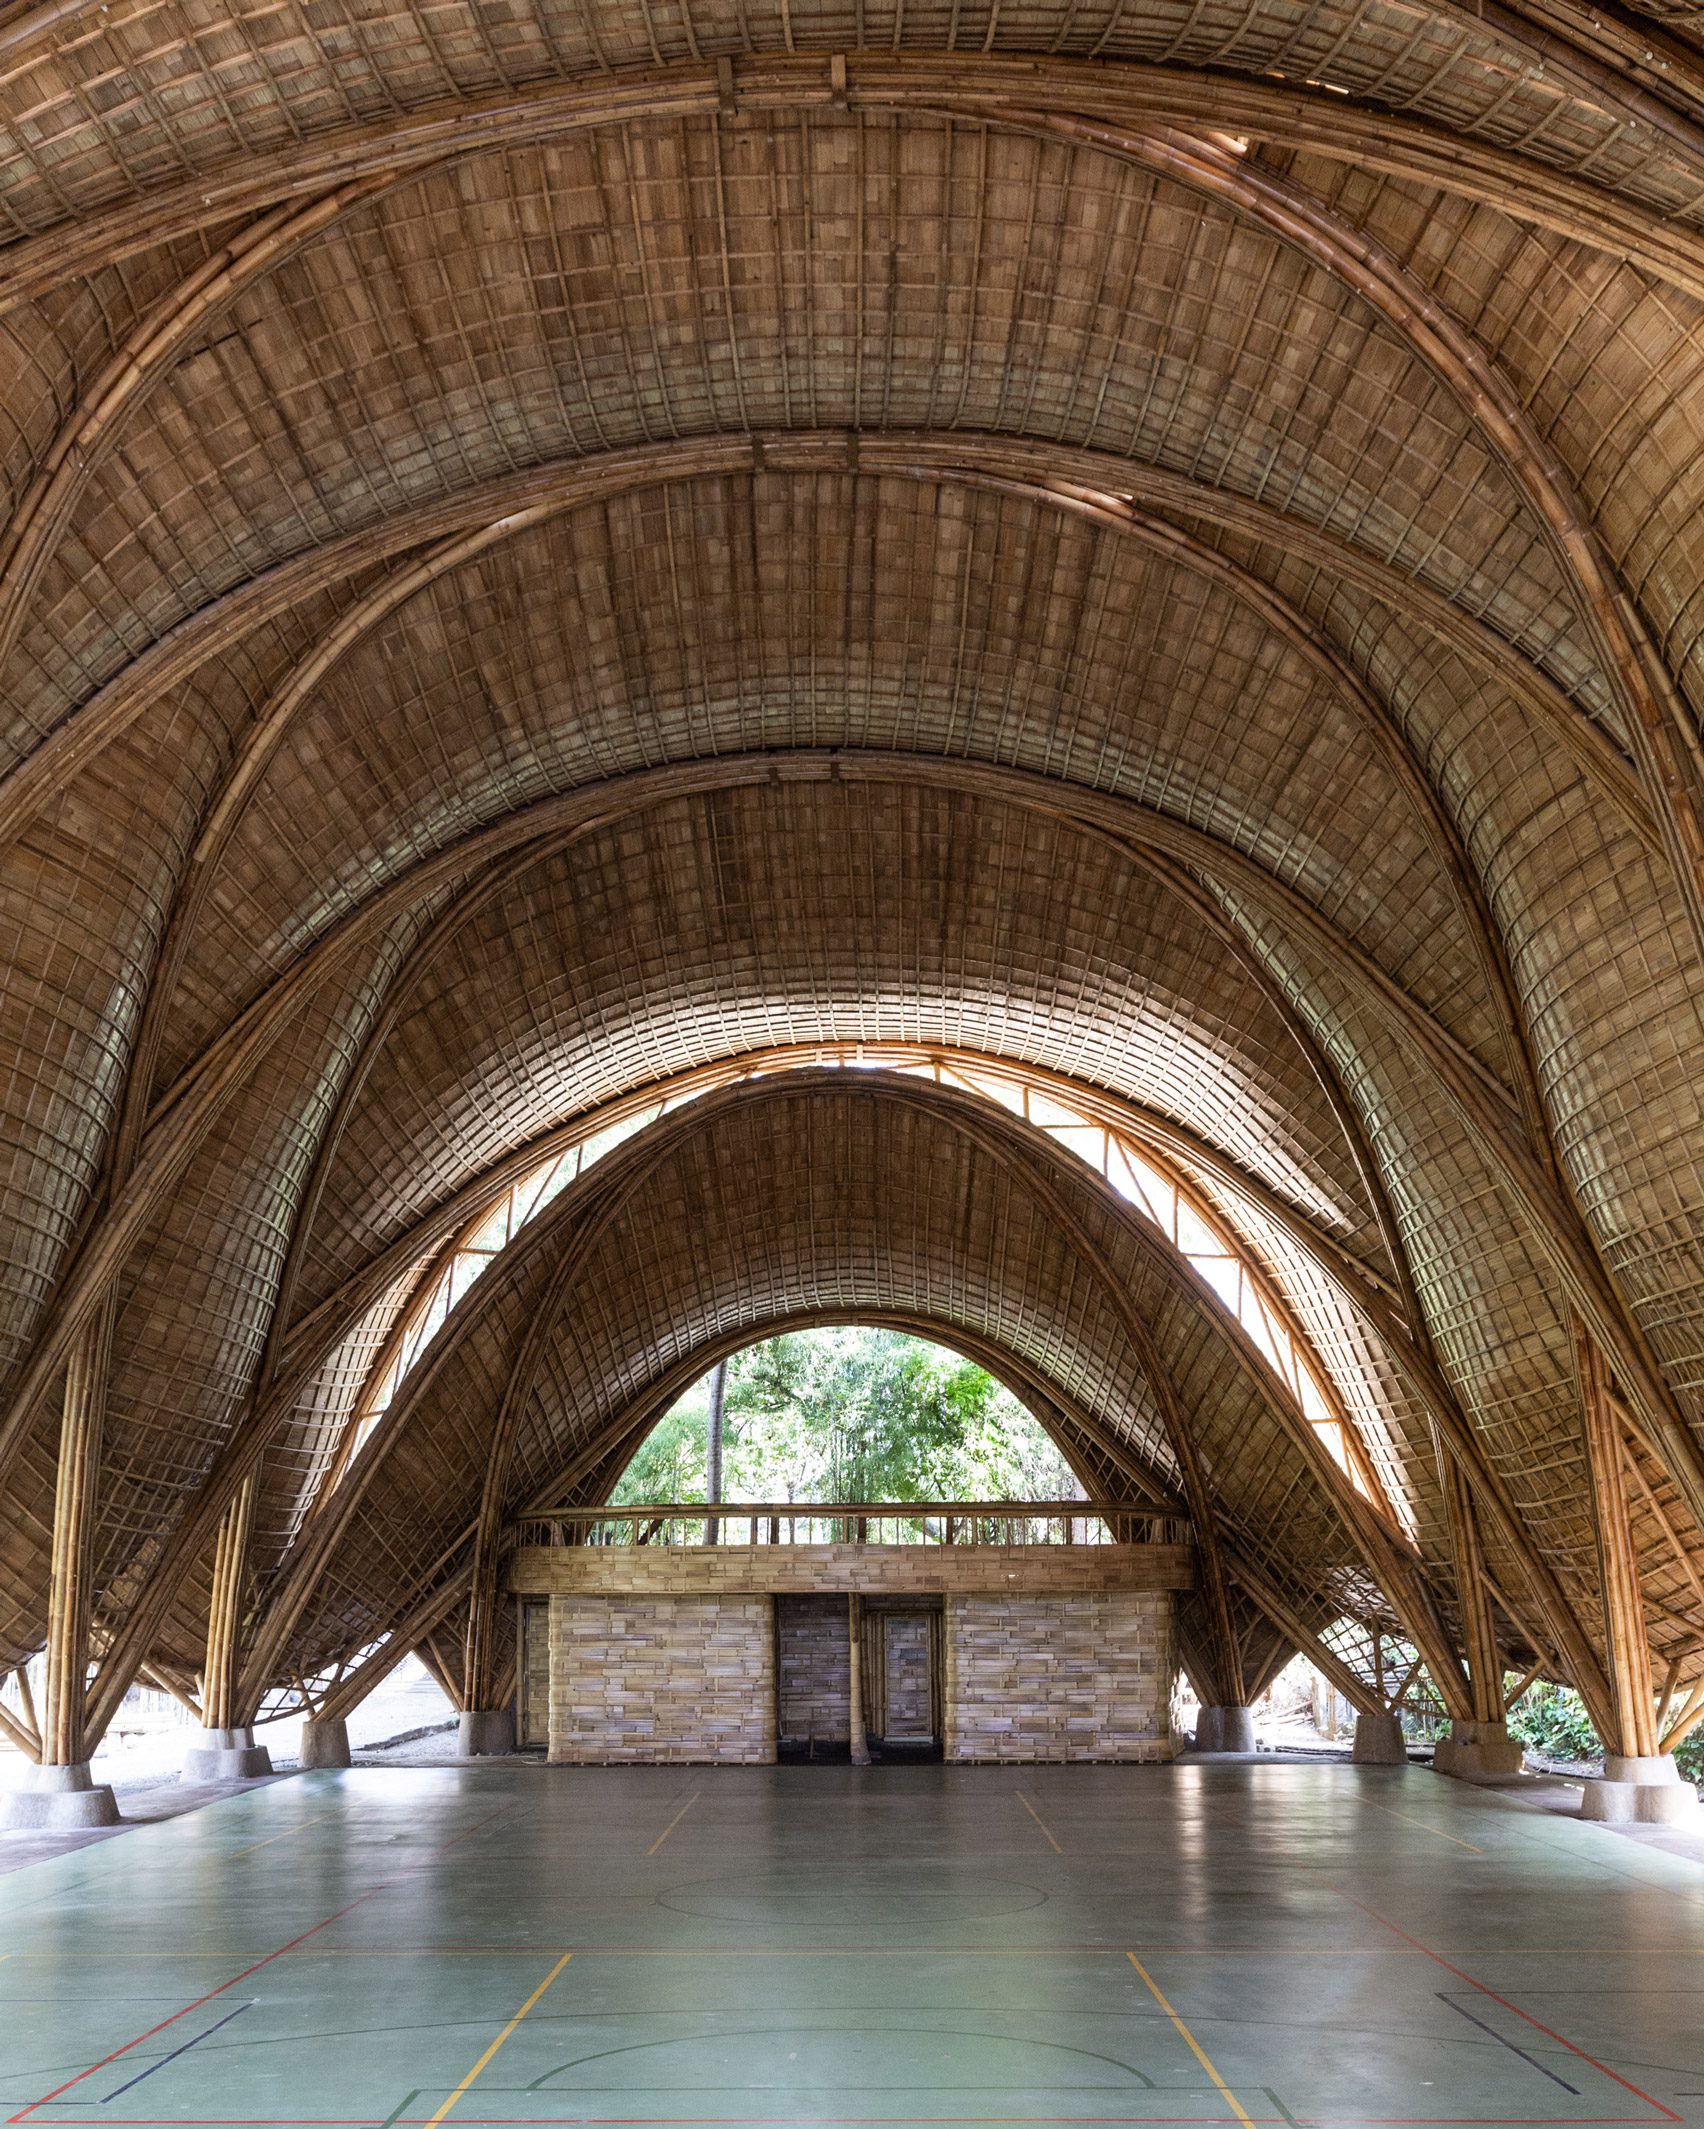 How Effective is Laminated Bamboo for Structural Applications?